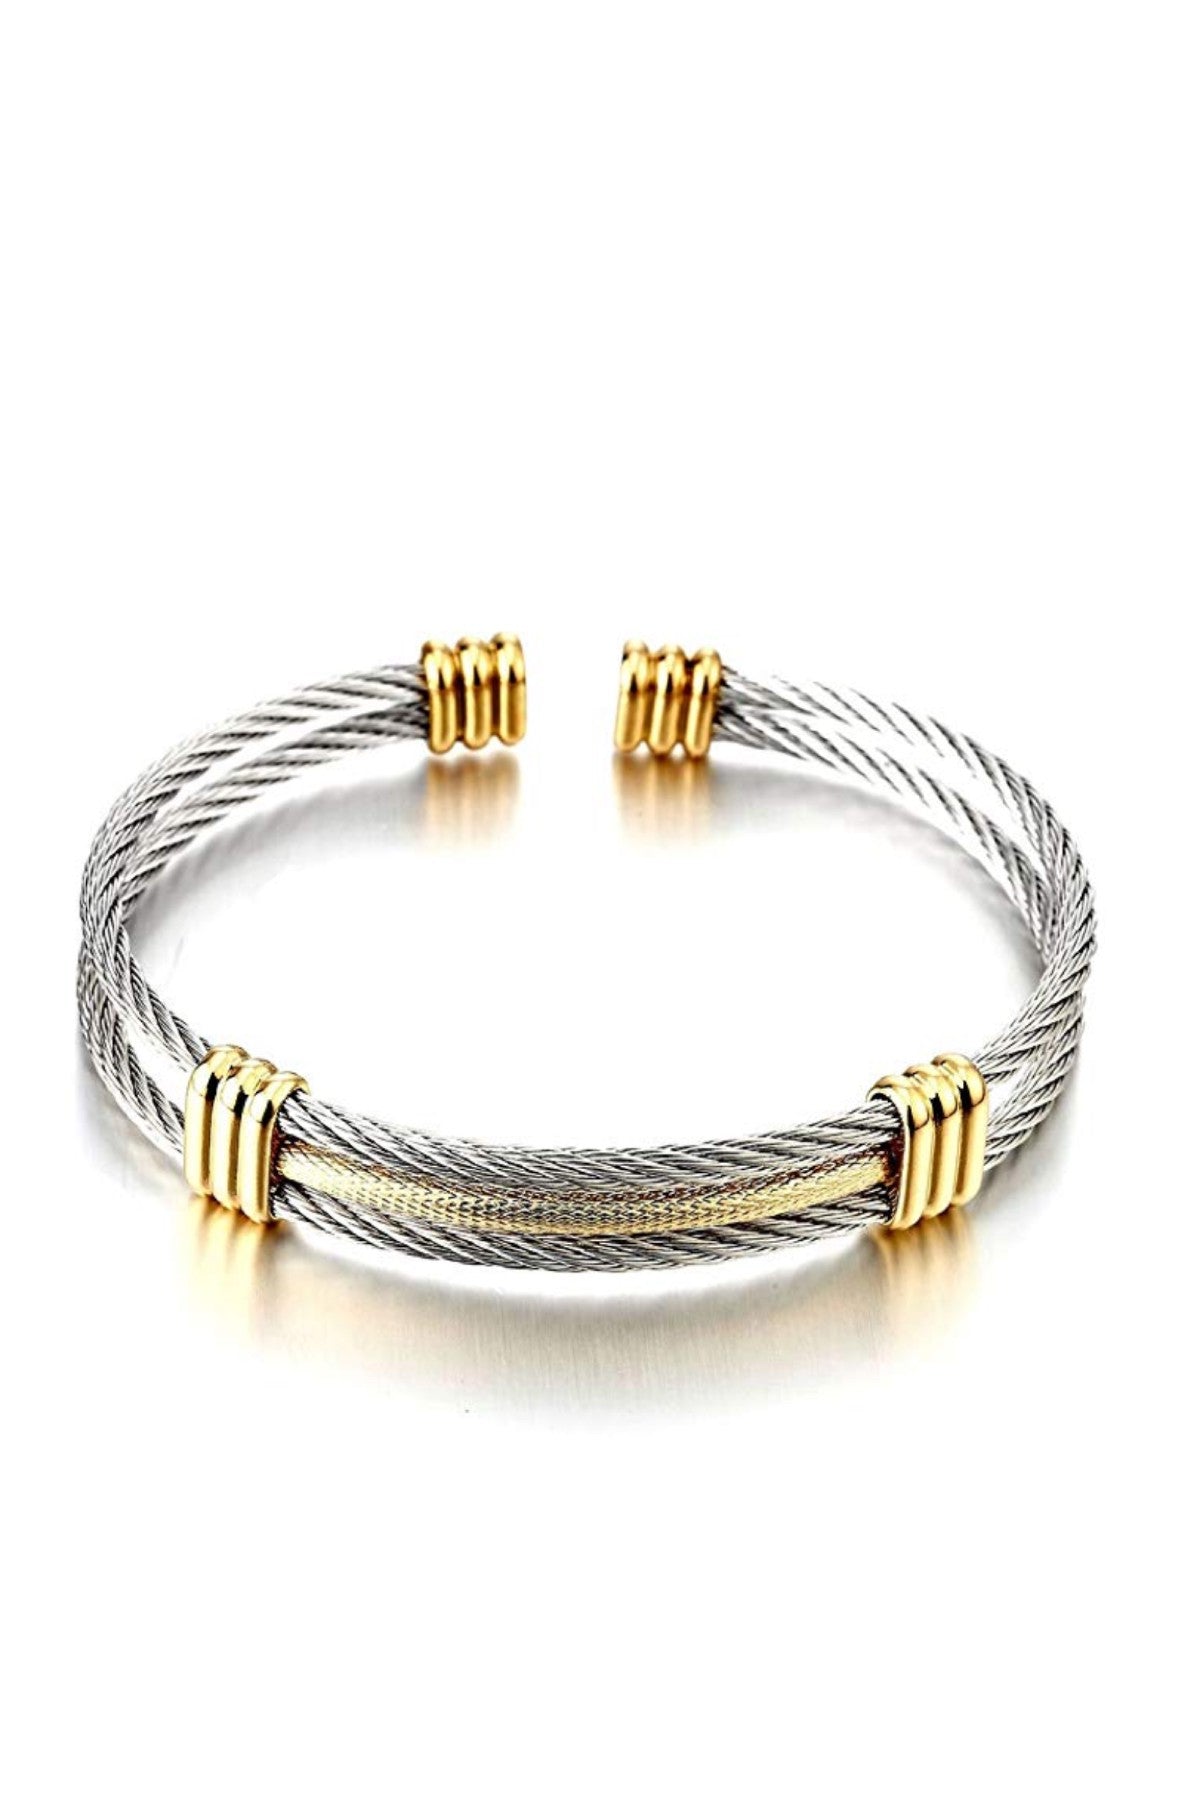 Stephen Oliver 18k Gold & Silver Two Tone Cable Cuff Bangle male